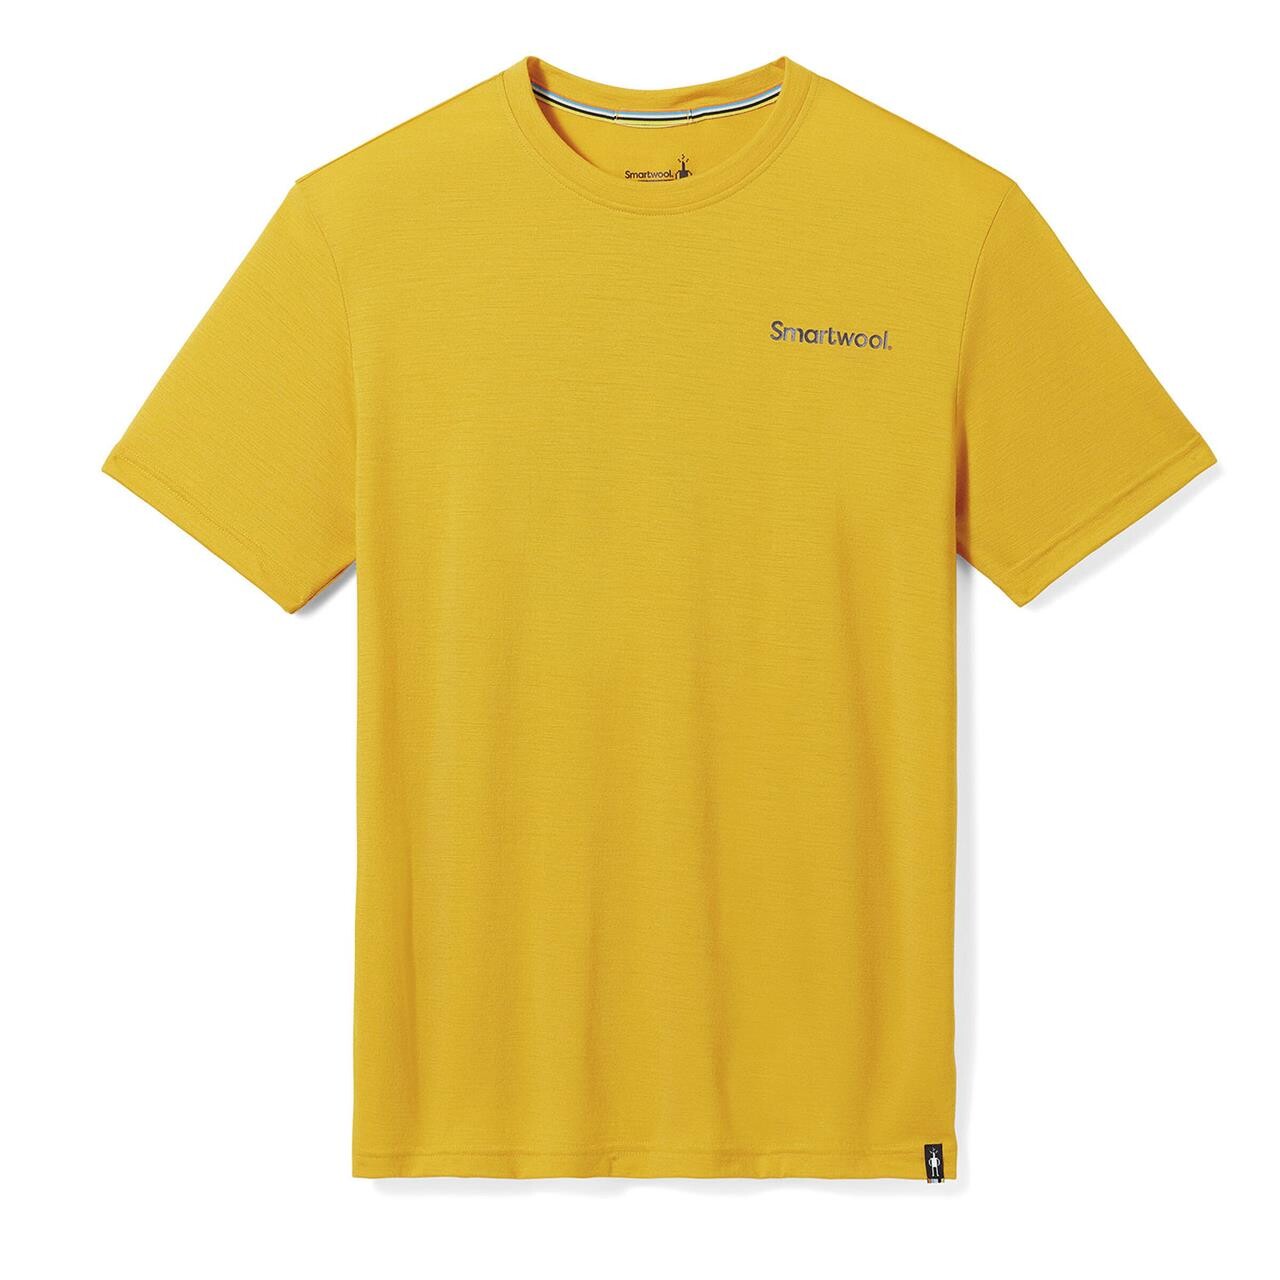 Se Smartwool Dawn Rise Graphic S/S Tee Slim Fit (Gul (HONEY GOLD) Small) hos Friluftsland.dk